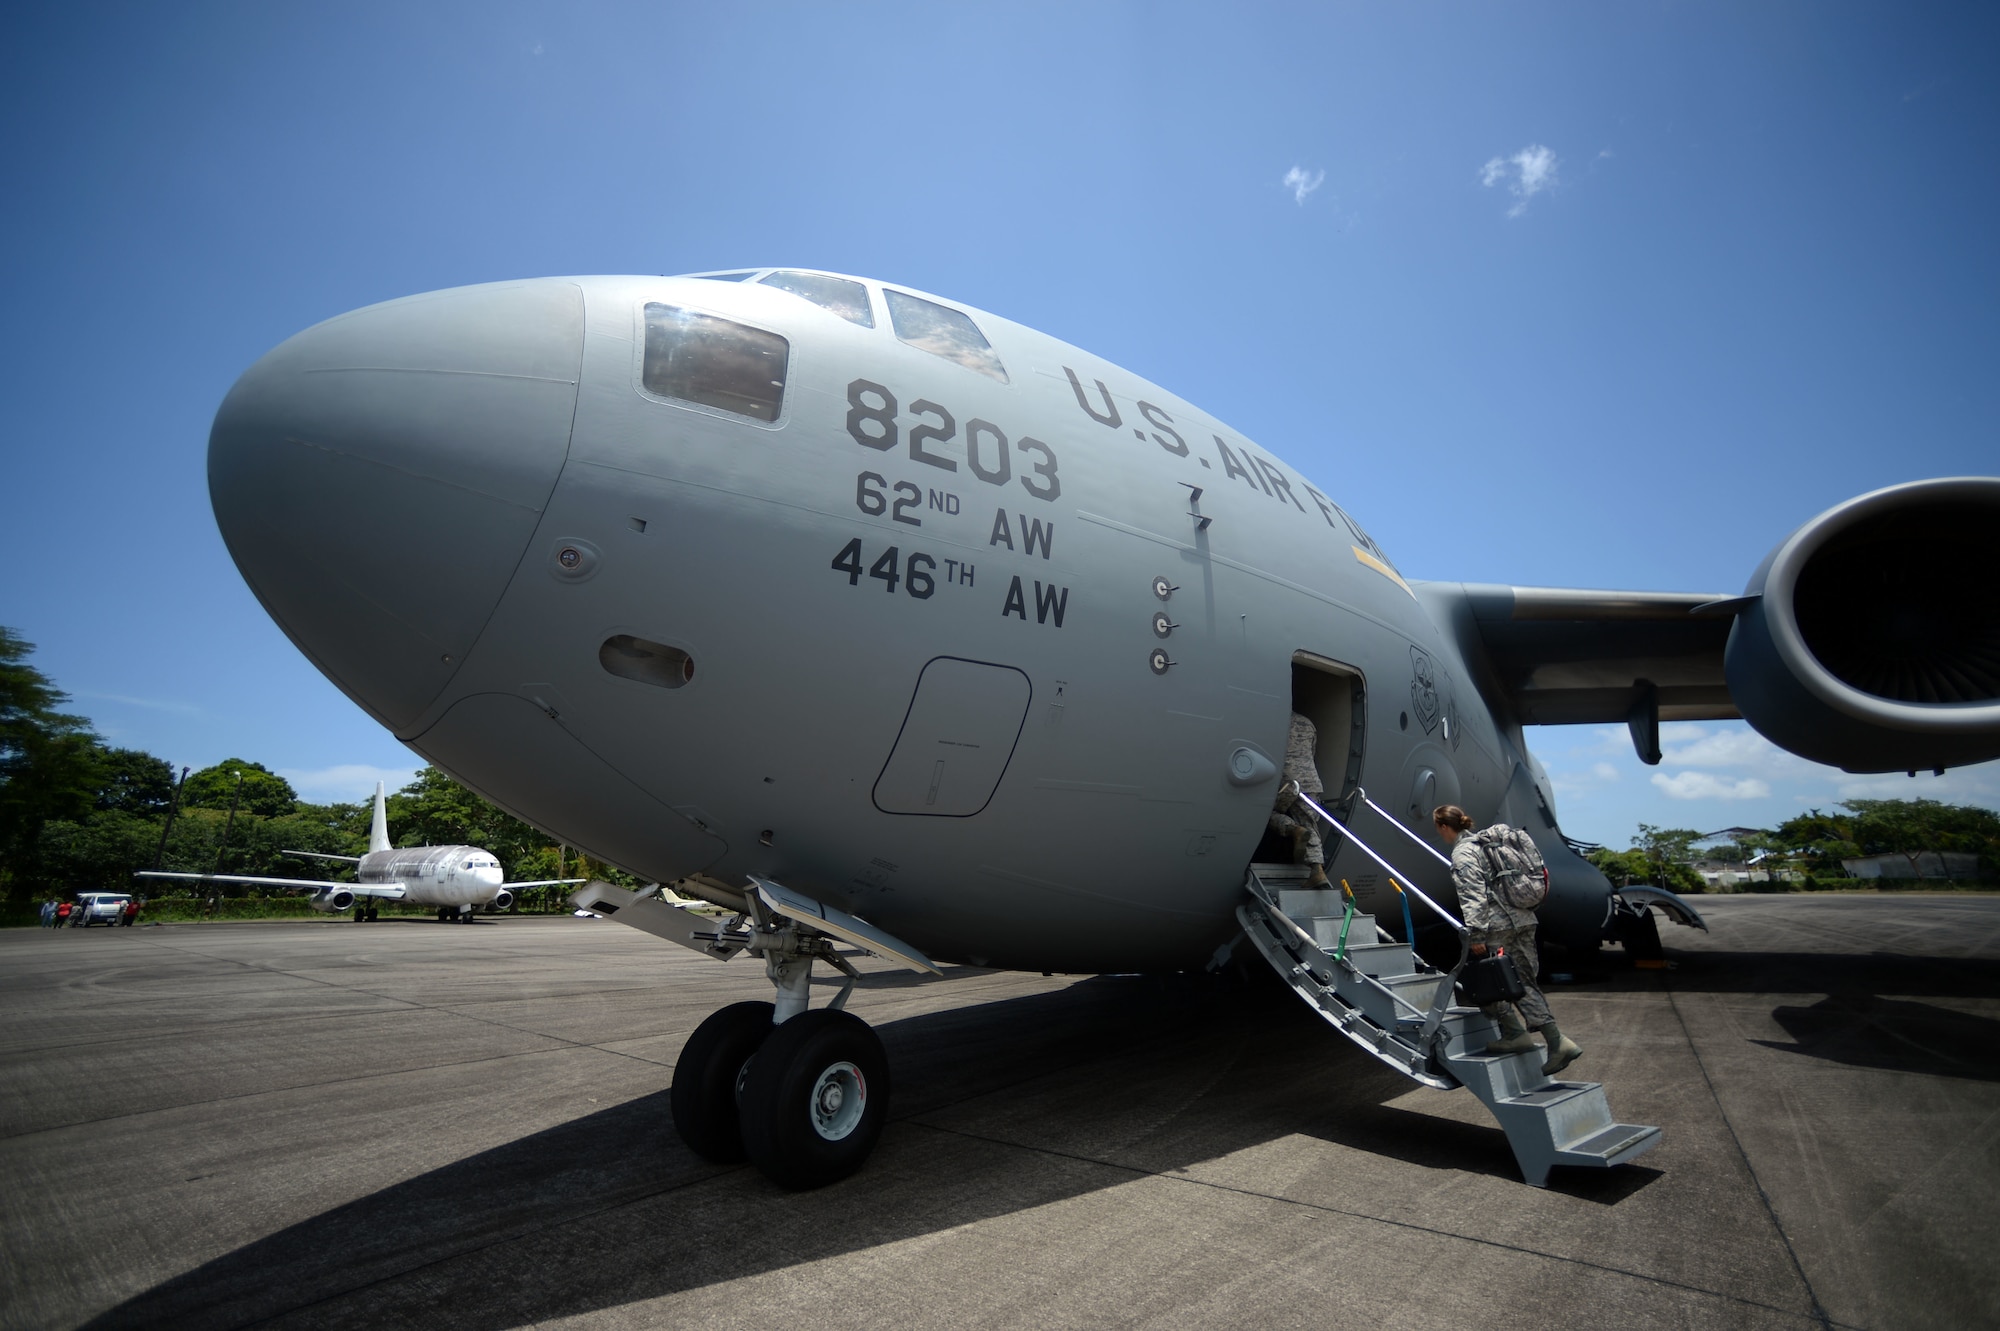 New Horizons Honduras 2015 training exercise personnel board a waiting C-17 Globemaster III from the 62nd Airlift Wing out of Joint Base Lewis-McChord, Wash., at Base Aerea Coronel Hector Caraccioli Moncada in La Ceiba, Honduras, Aug. 28, 2015, on its way to Hurlburt Field, Fla. Vehicles, equipment and personnel from New Horizons redeployed to Hurlburt Field while remaining exercise members will coordinate the sealift of all other equipment. New Horizons was launched in the 1980s and is an annual joint humanitarian assistance exercise that U.S. Southern Command conducts with a partner nation in Central America, South America or the Caribbean. The exercise improves joint training readiness of U.S. and partner nation civil engineers, medical professionals and support personnel through humanitarian assistance activities. (U.S. Air Force photo by Capt. David J. Murphy/Released)